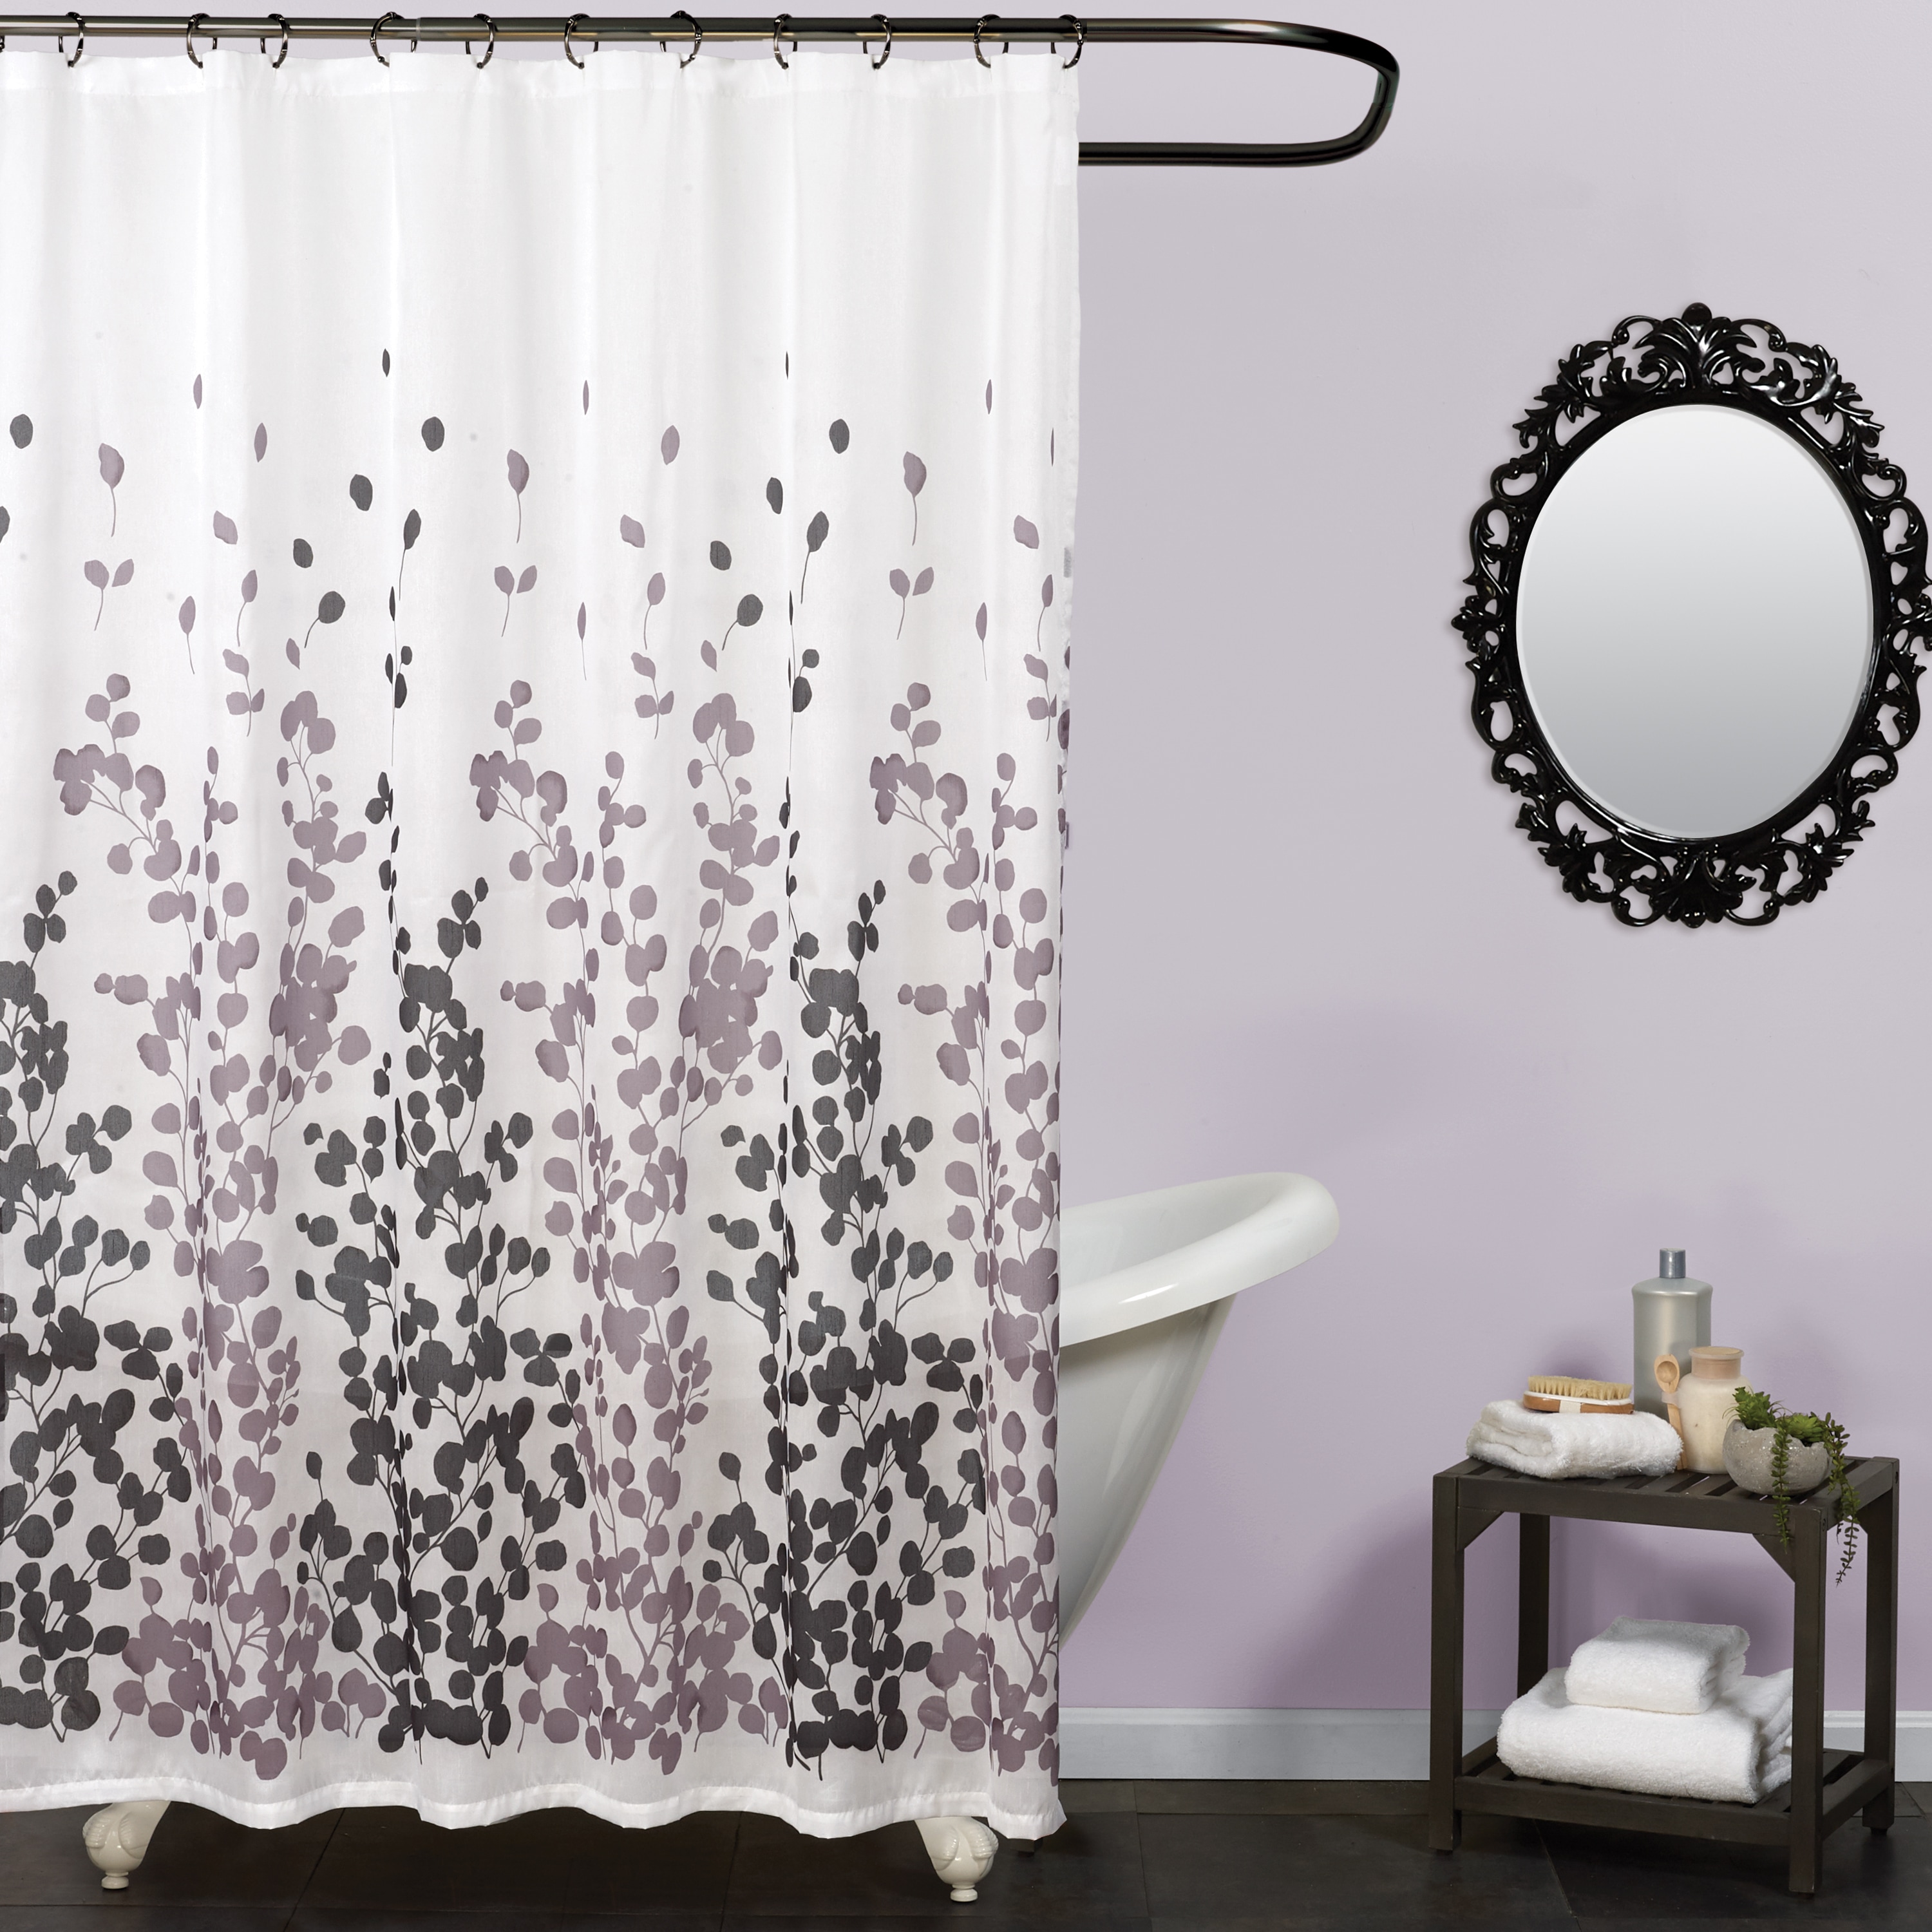 Curtain for Shower Made of Polyester – mDesign Cotton Shower Curtain 